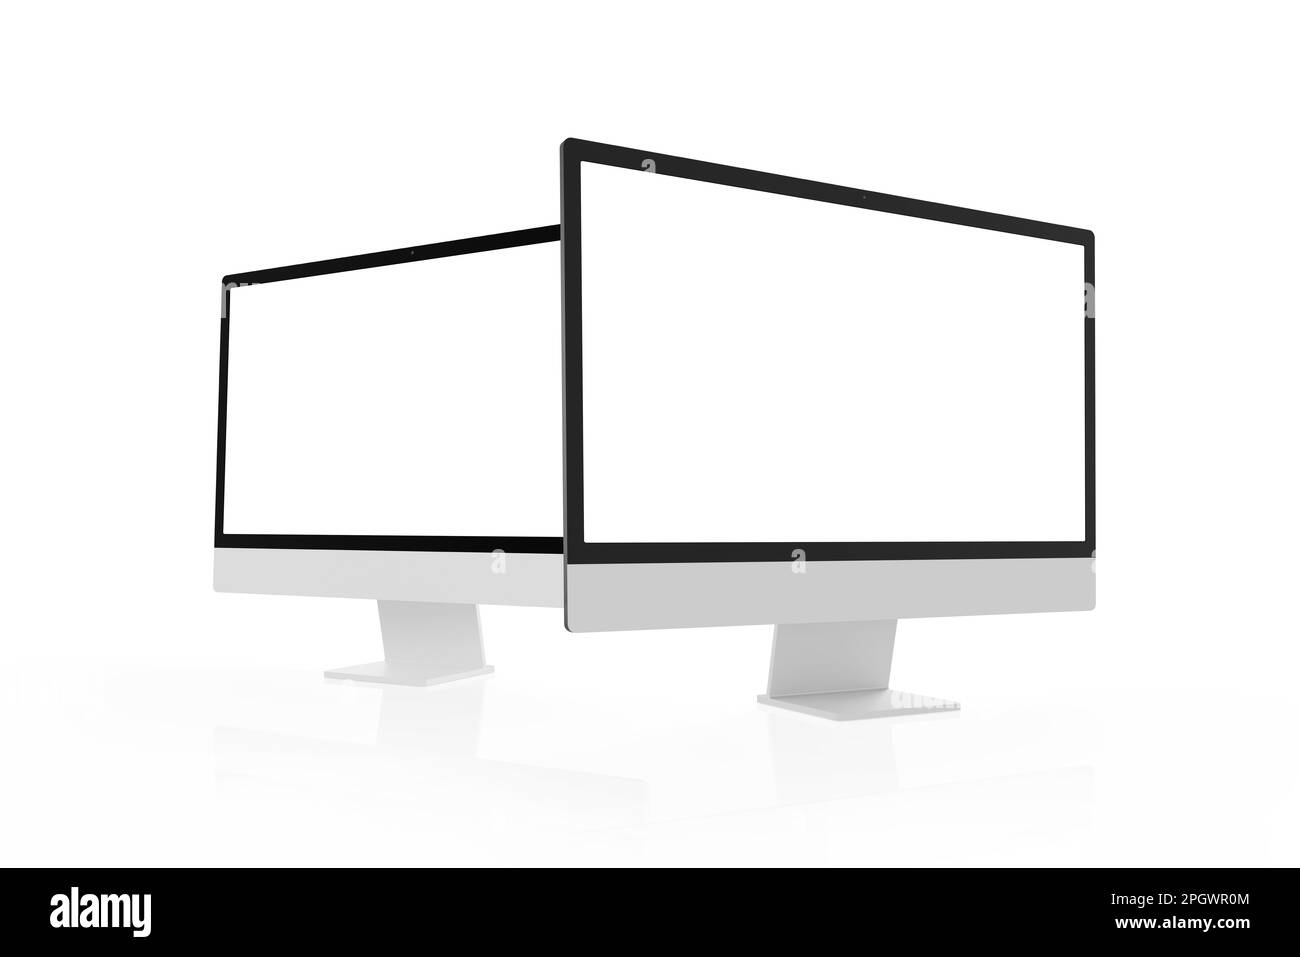 Two computer display mockups isolated. Perspective side view Stock Photo